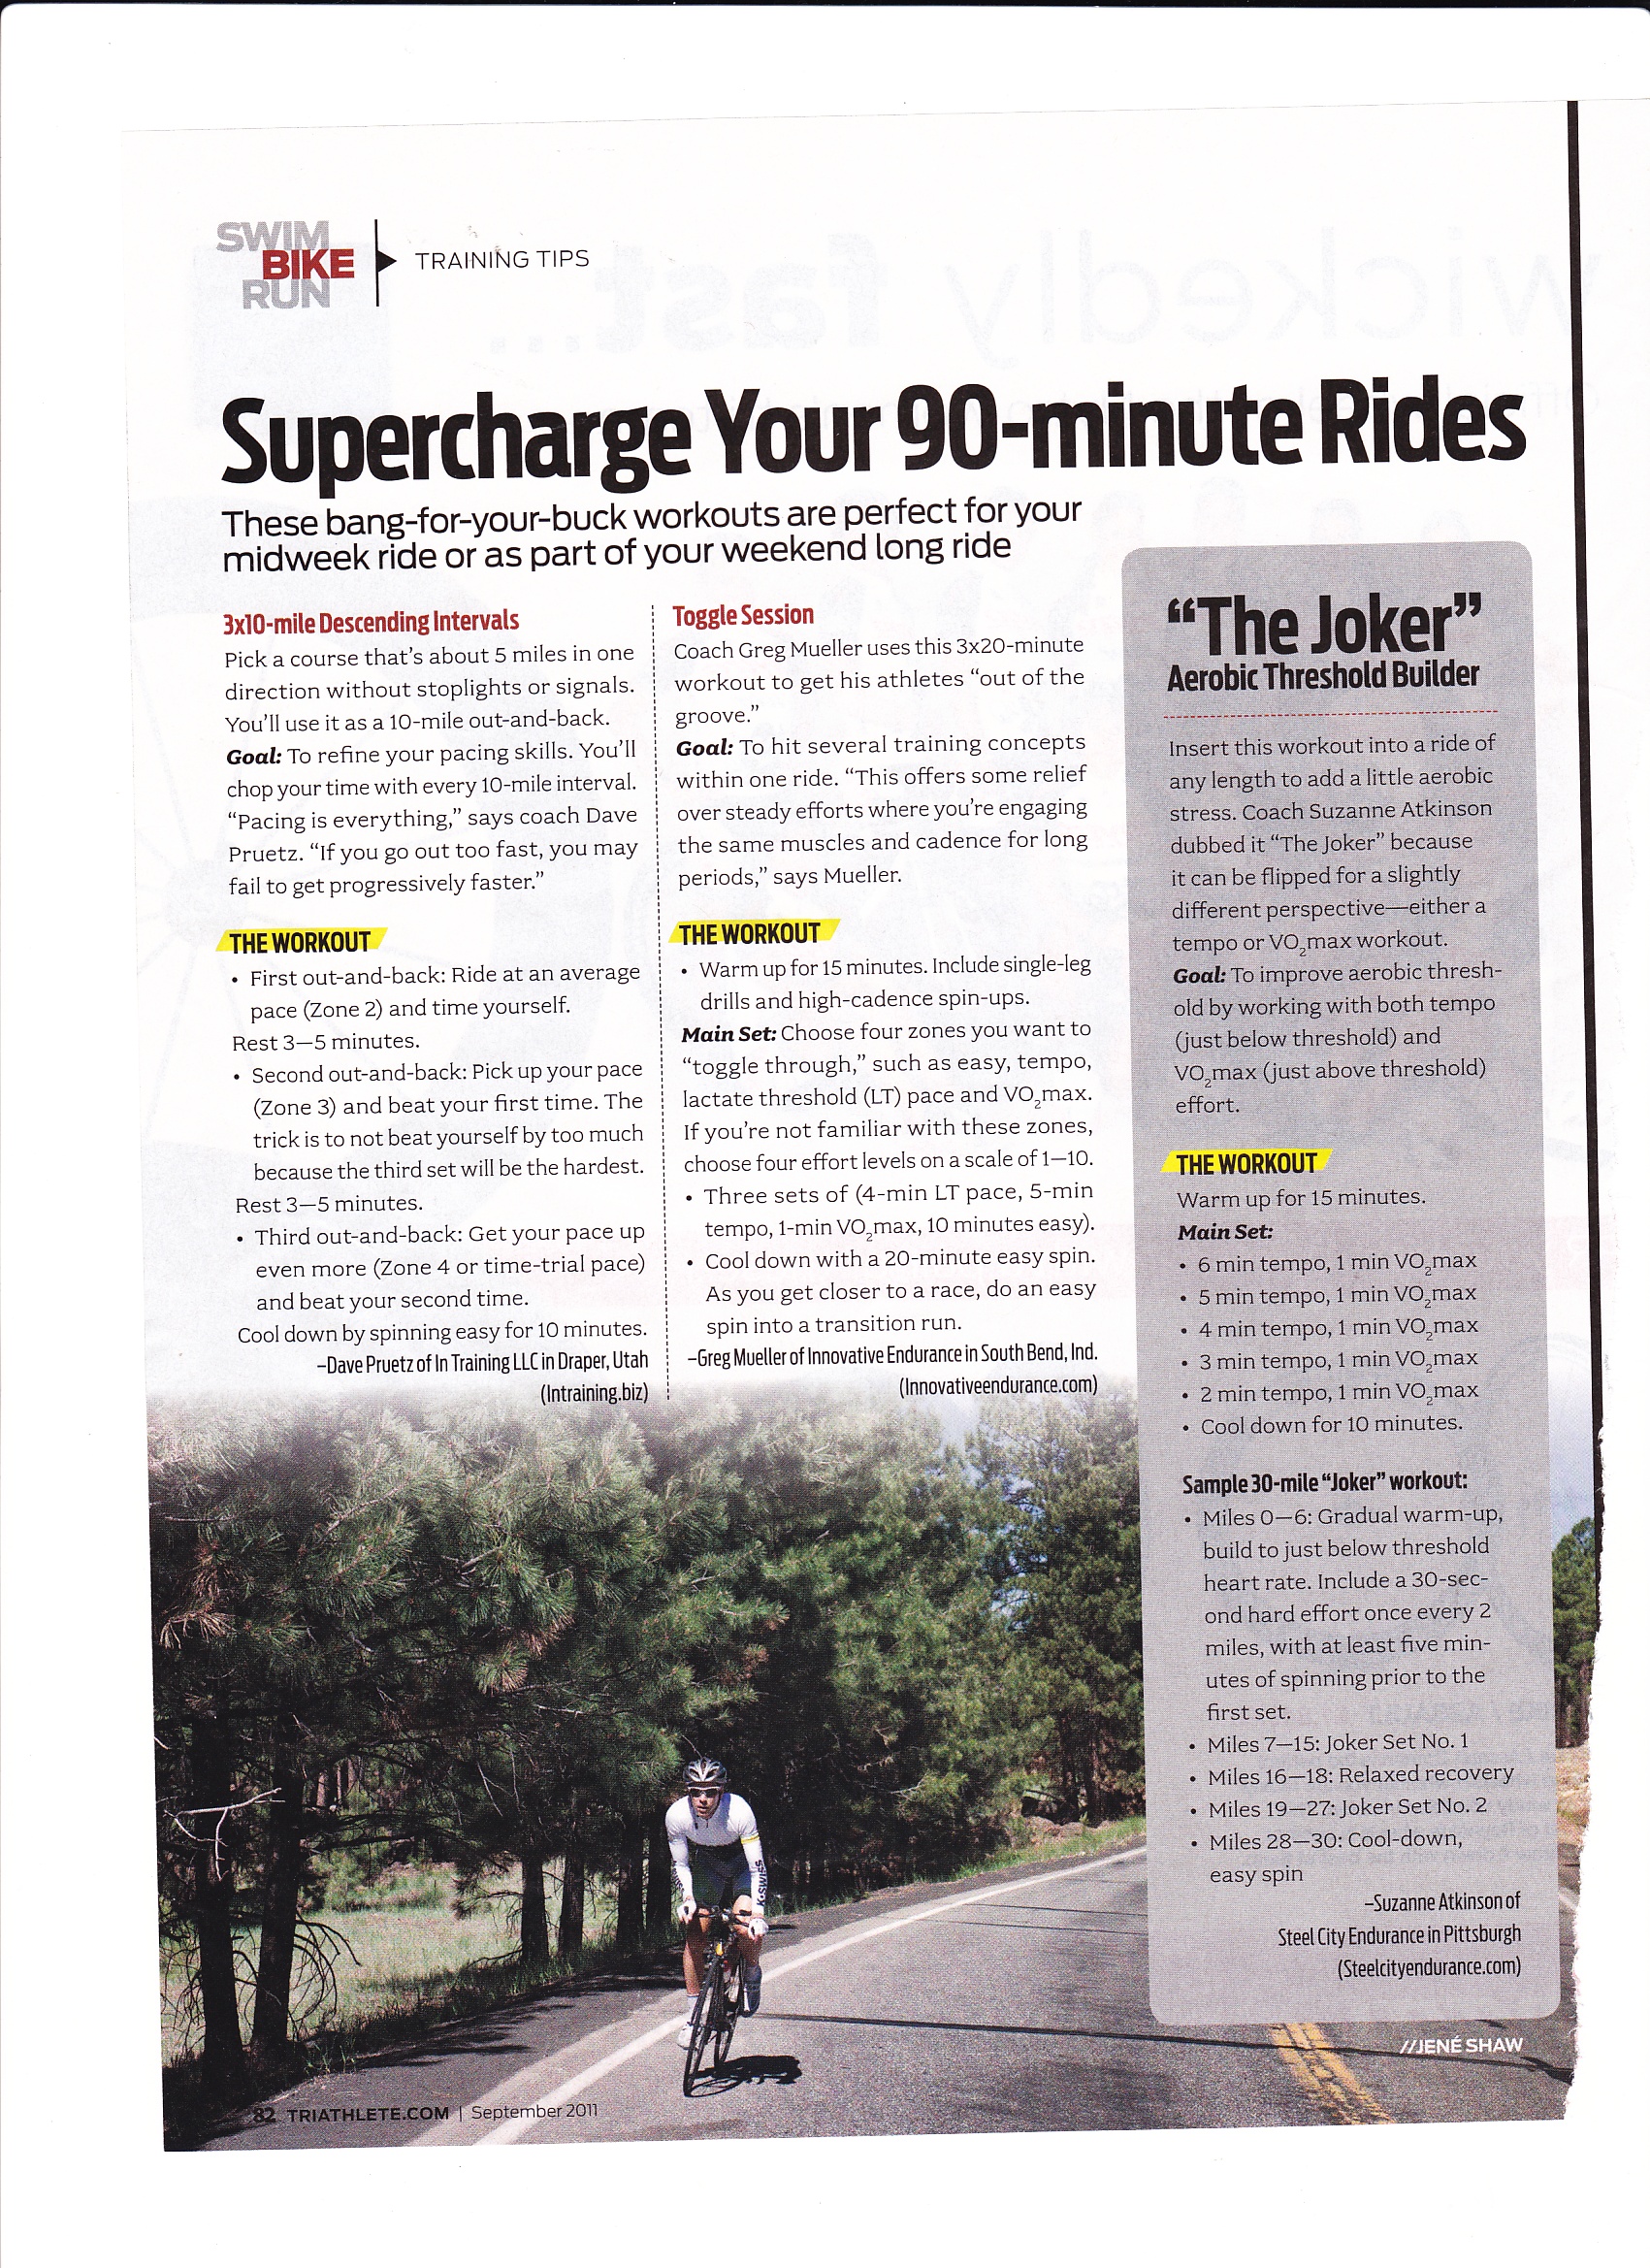 Supercharge your 90-mn bike rides